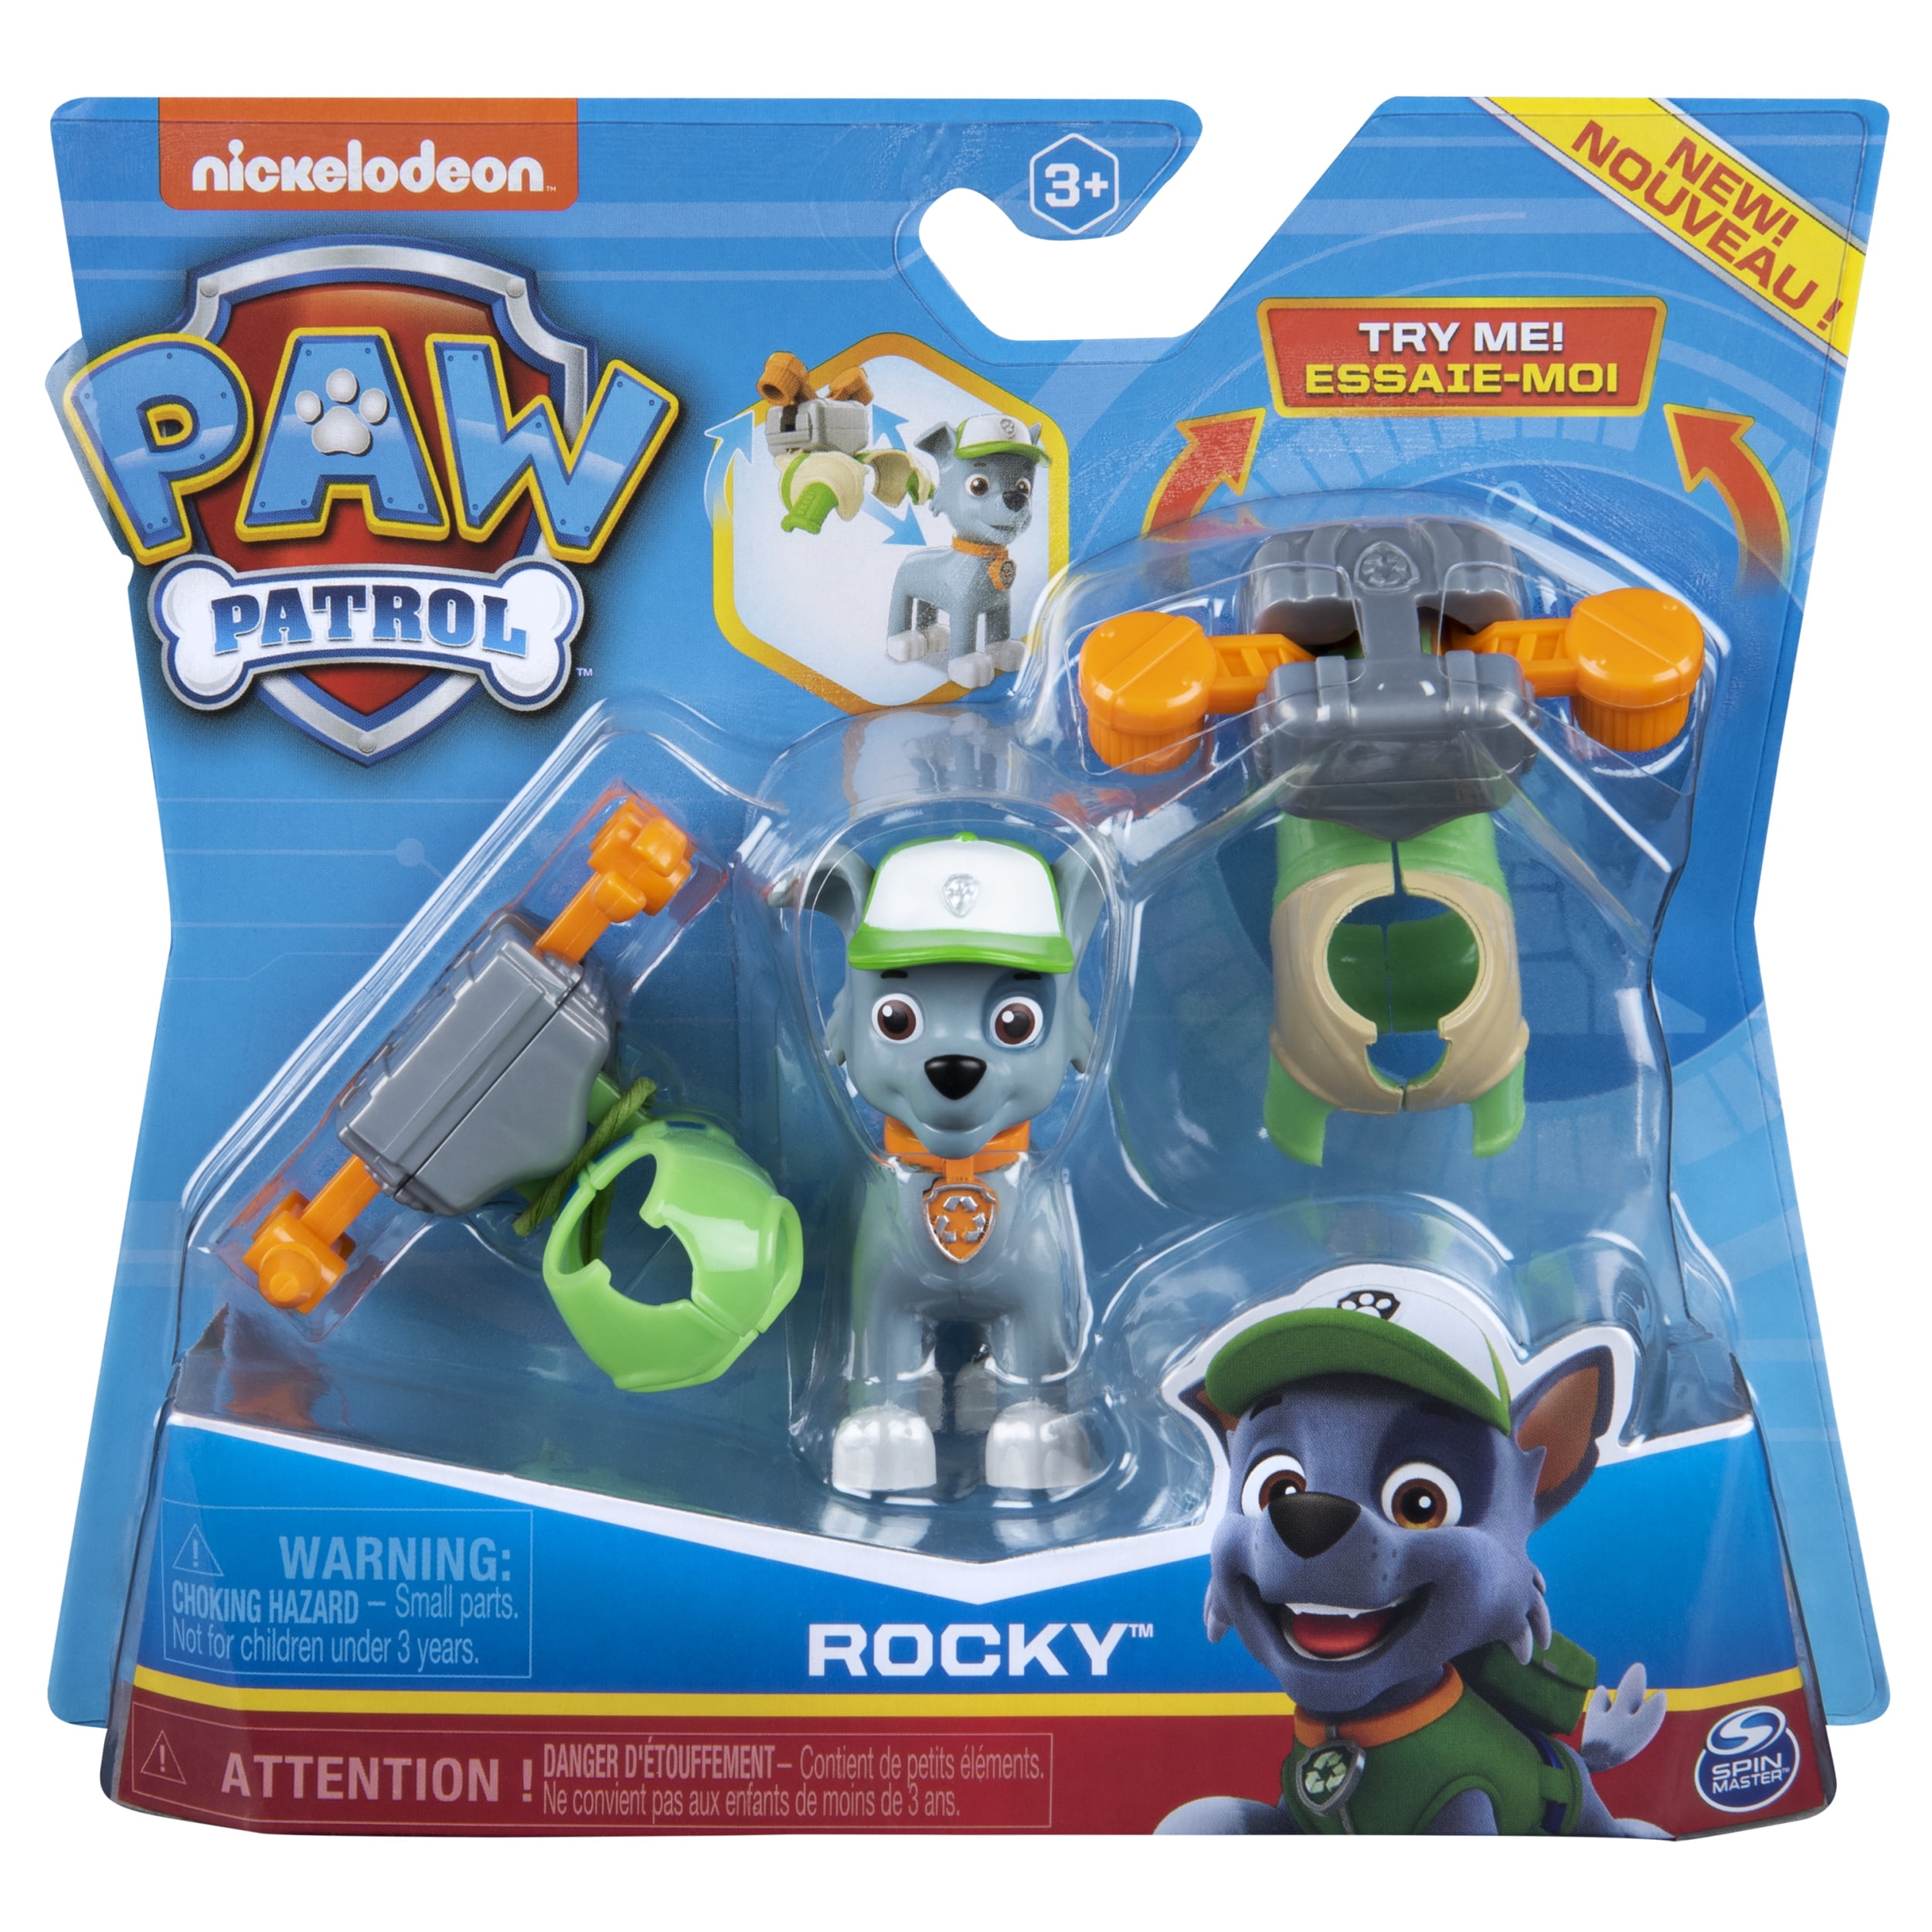 Nickelodeon Paw Patrol Marshall Rescue Adventure 2 Clip on Backpacks Ages 3 for sale online